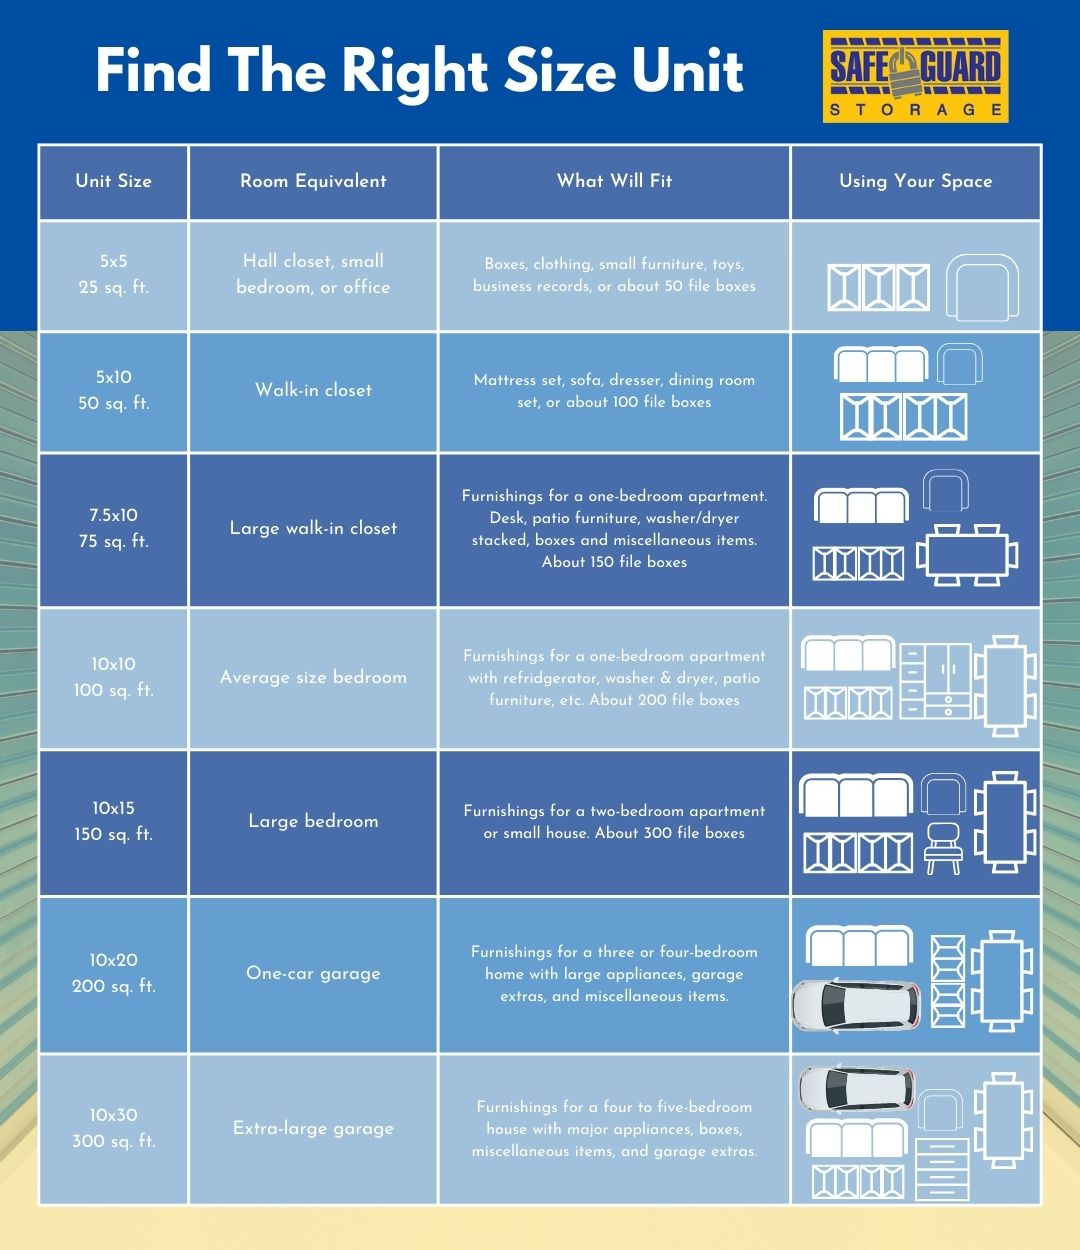 M49183 - Find The Right Sized Unit - Infographic.jpg